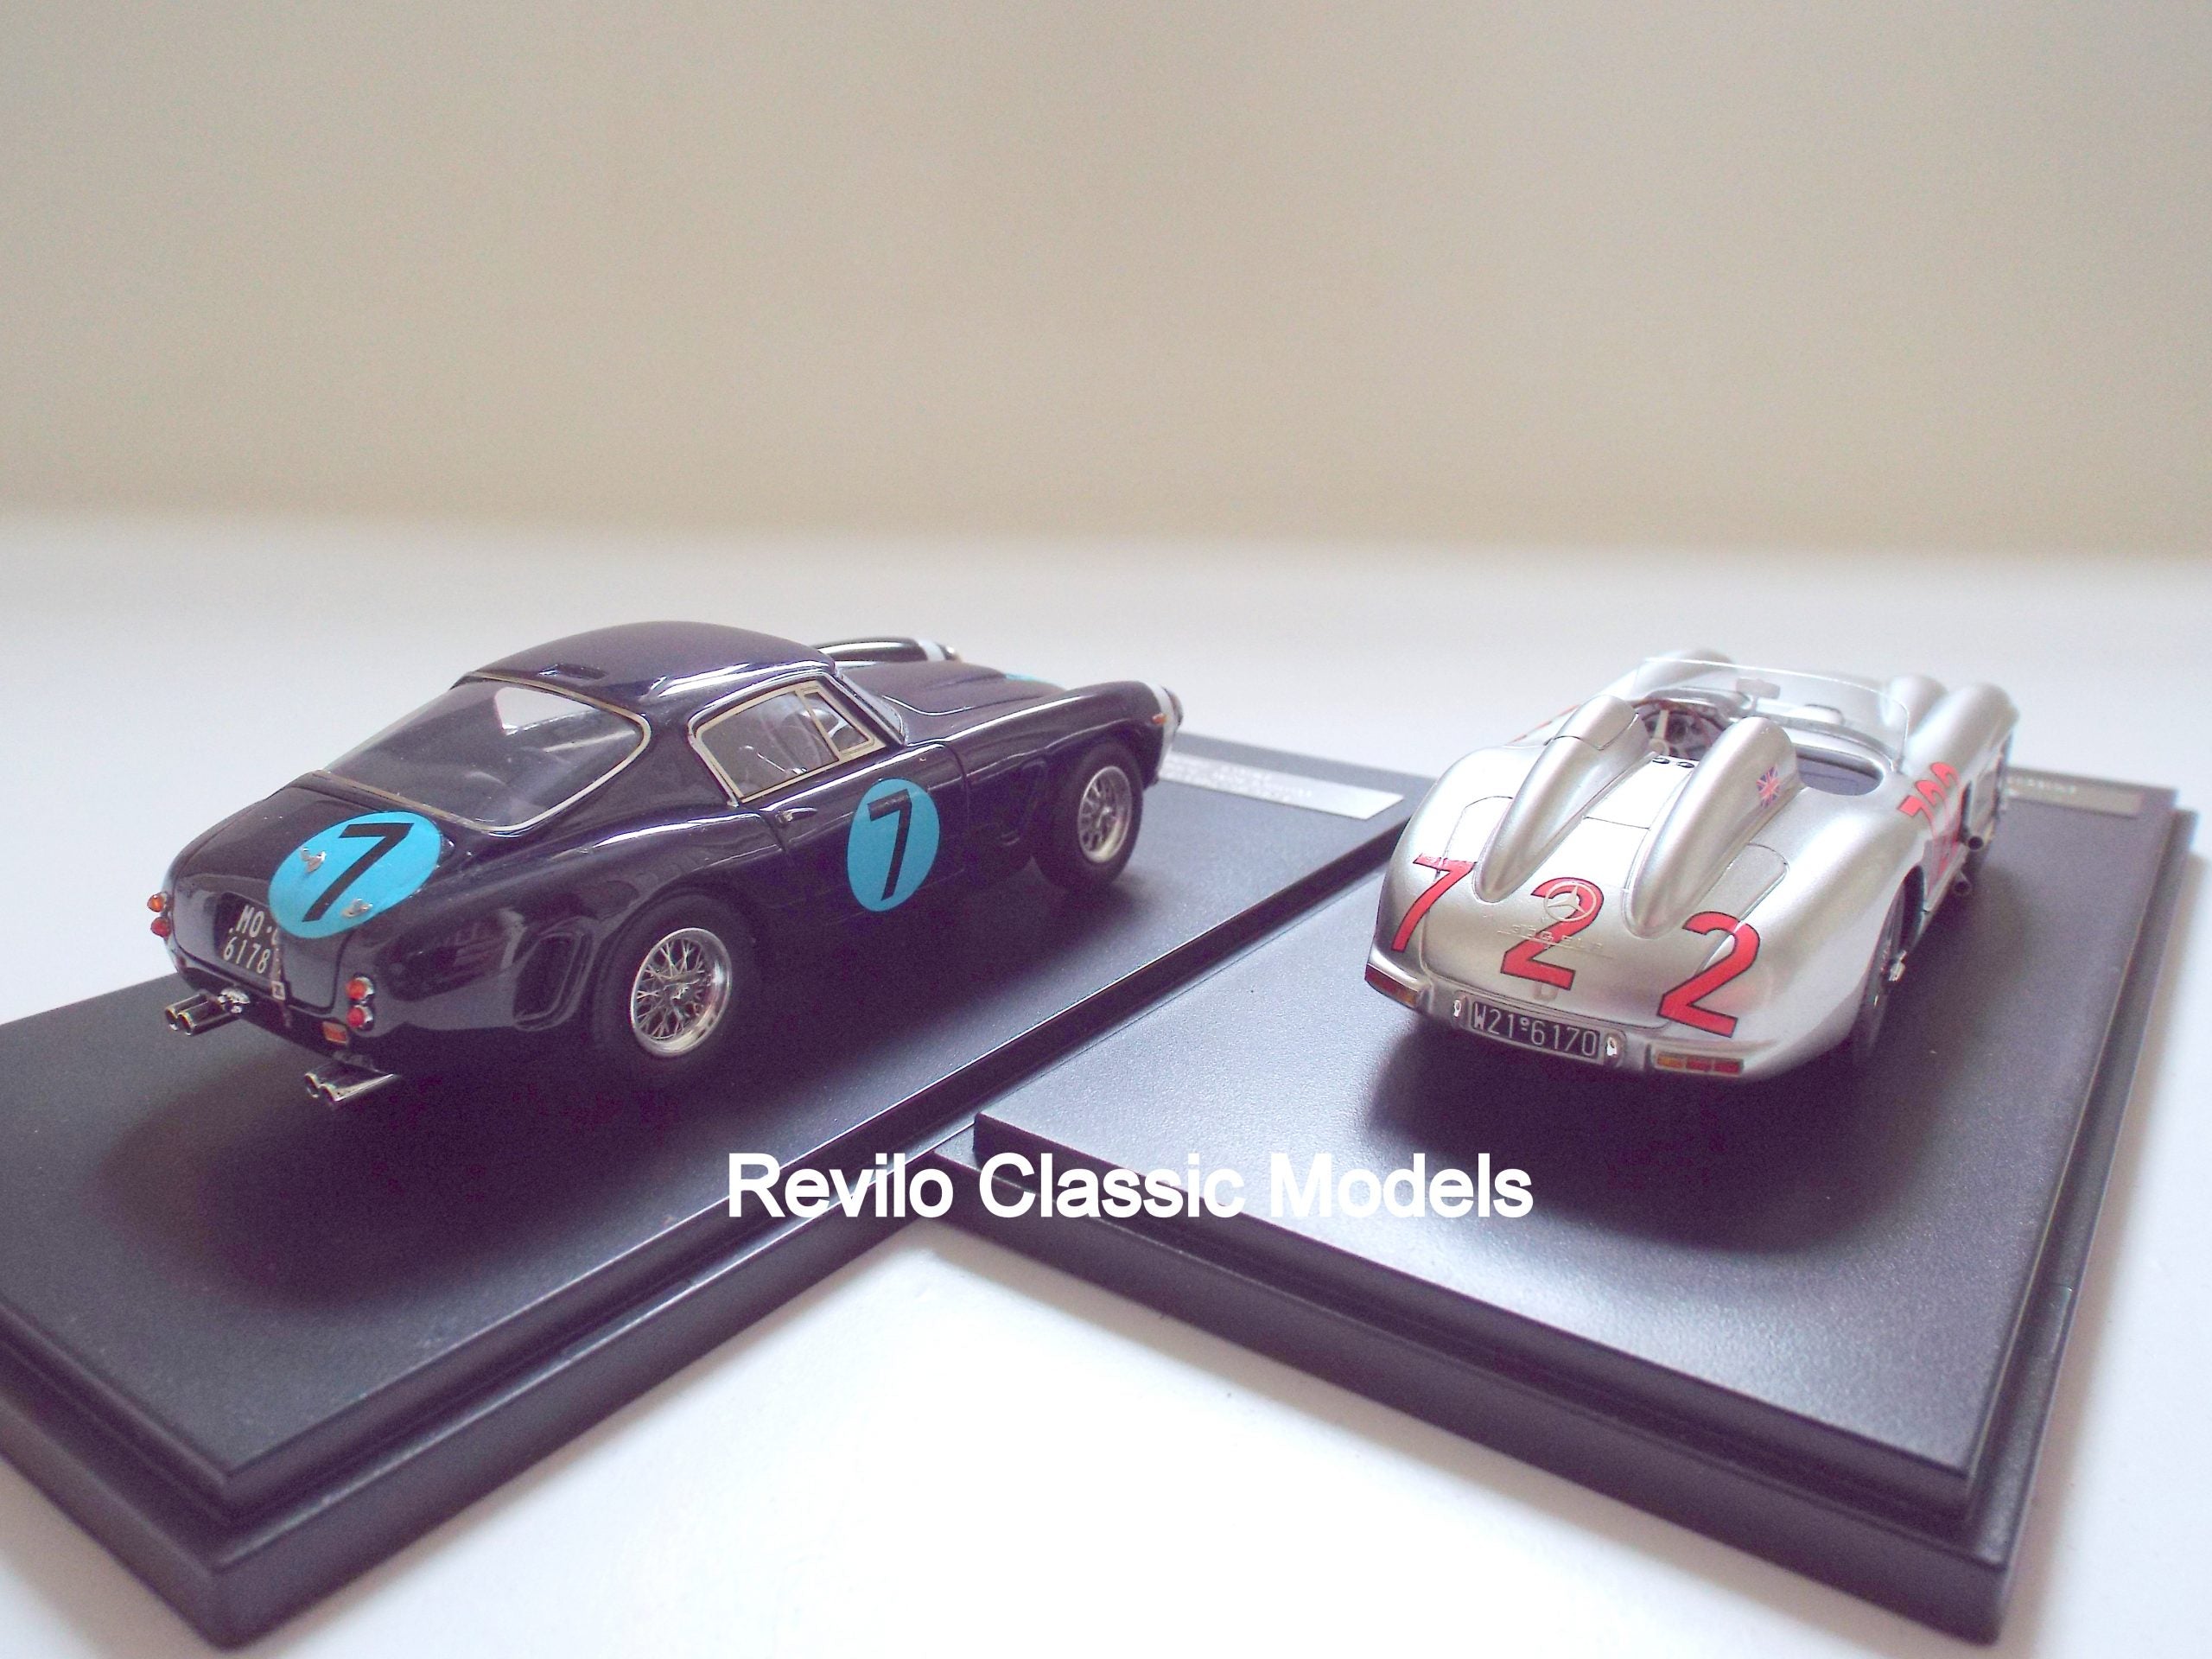 1:43 scale Stirling Moss Celebration two car set